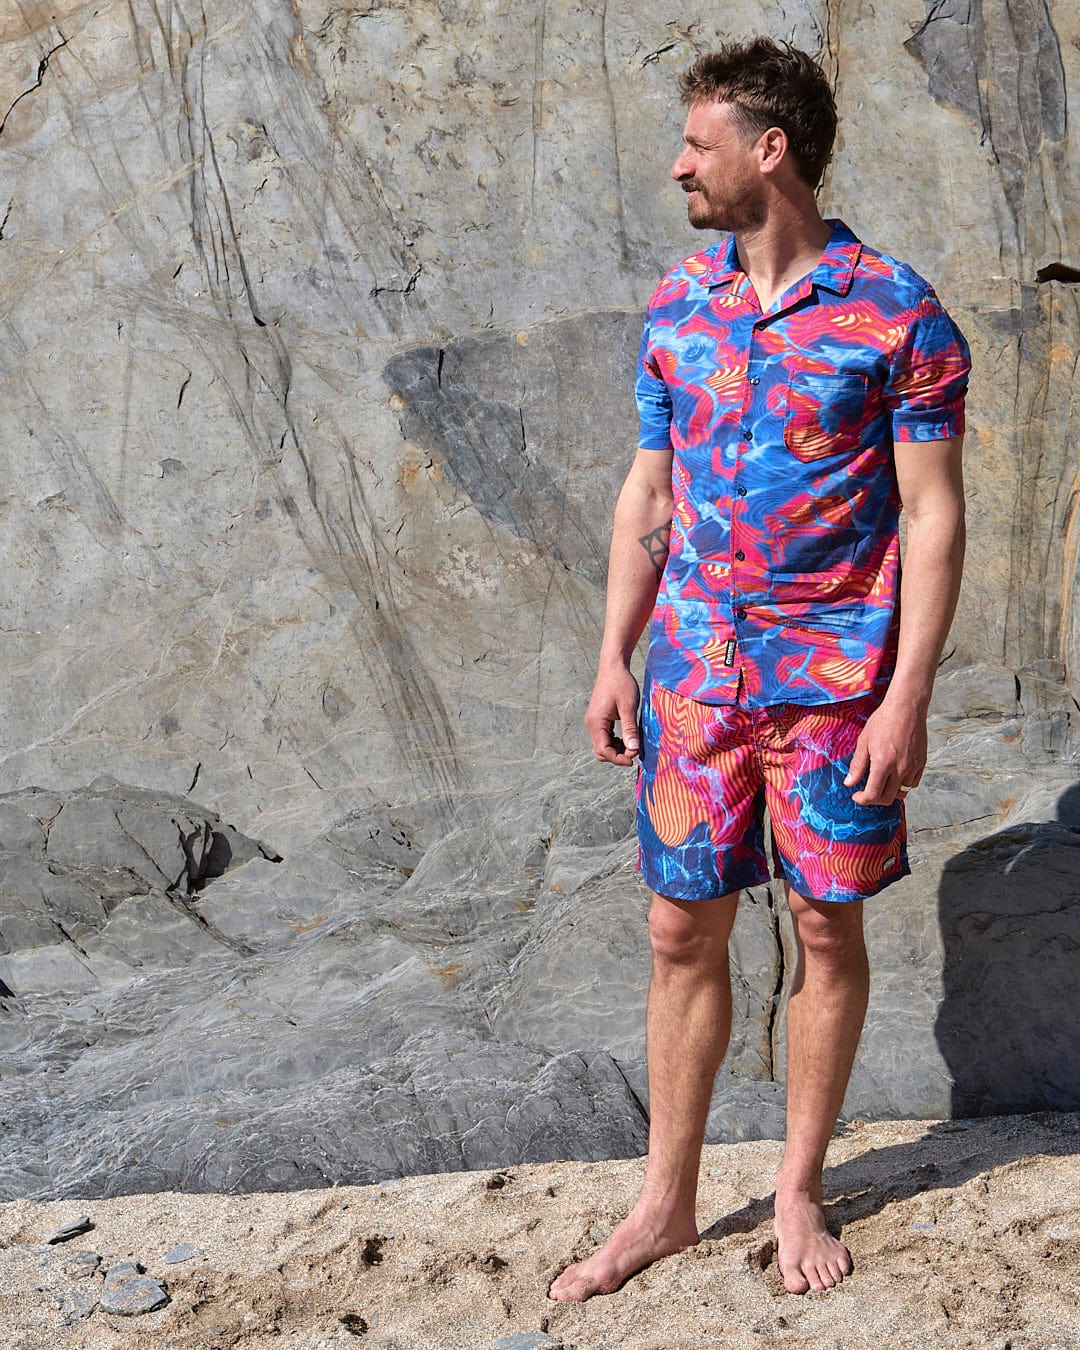 A man standing on a beach wearing a Saltrock Poolside - Mens Short Sleeve Shirt and shorts made with lightweight fabric.